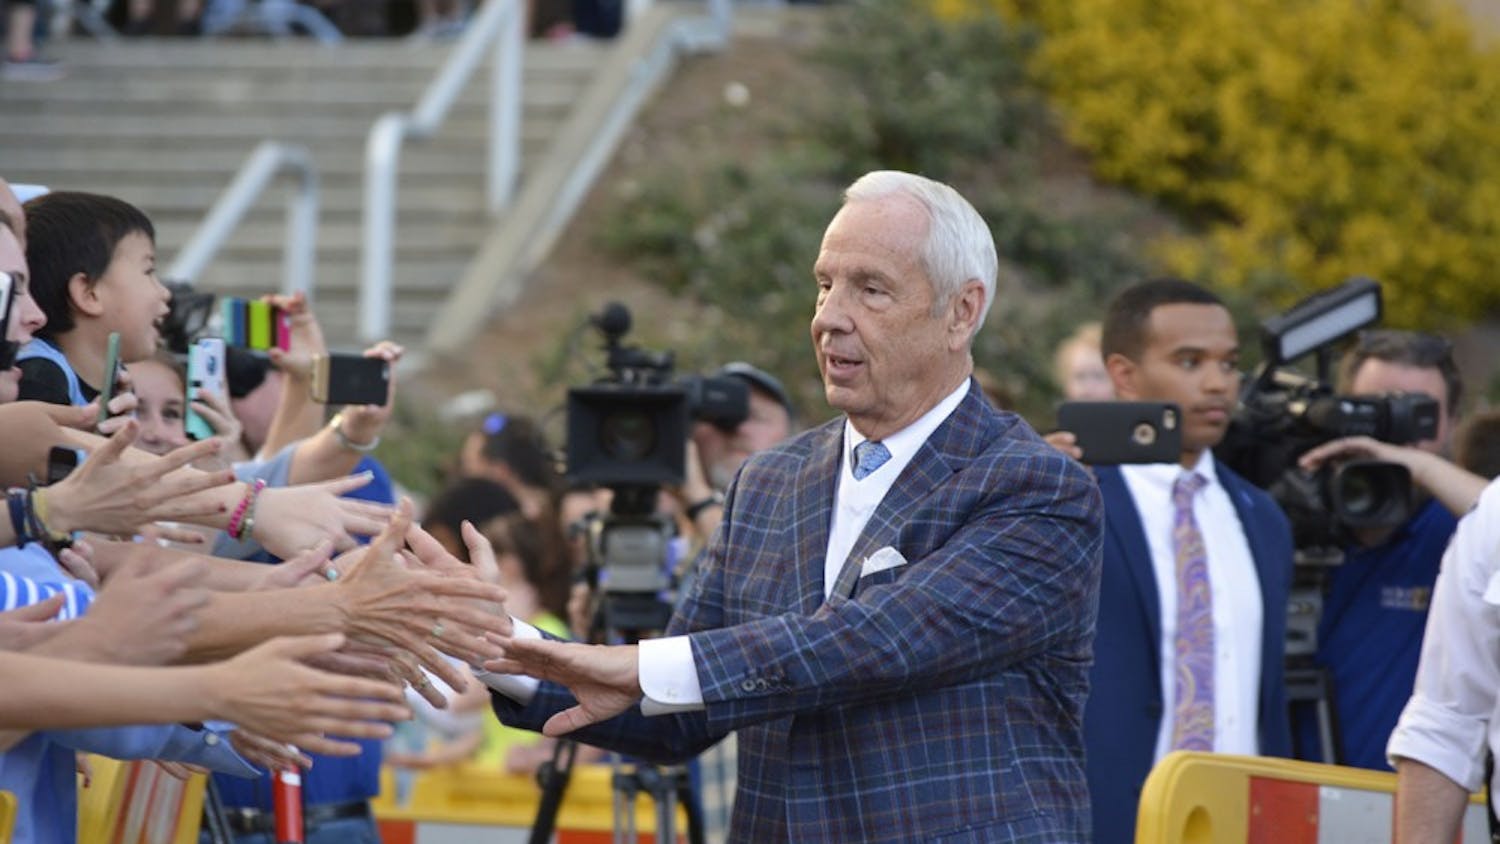 Coach Roy Williams greets fans at the UNC Men's Basketball send-off for the Final Four in Phoenix. The event was held at the Dean Smith Center on Tuesday afternoon, March 28, 2017.